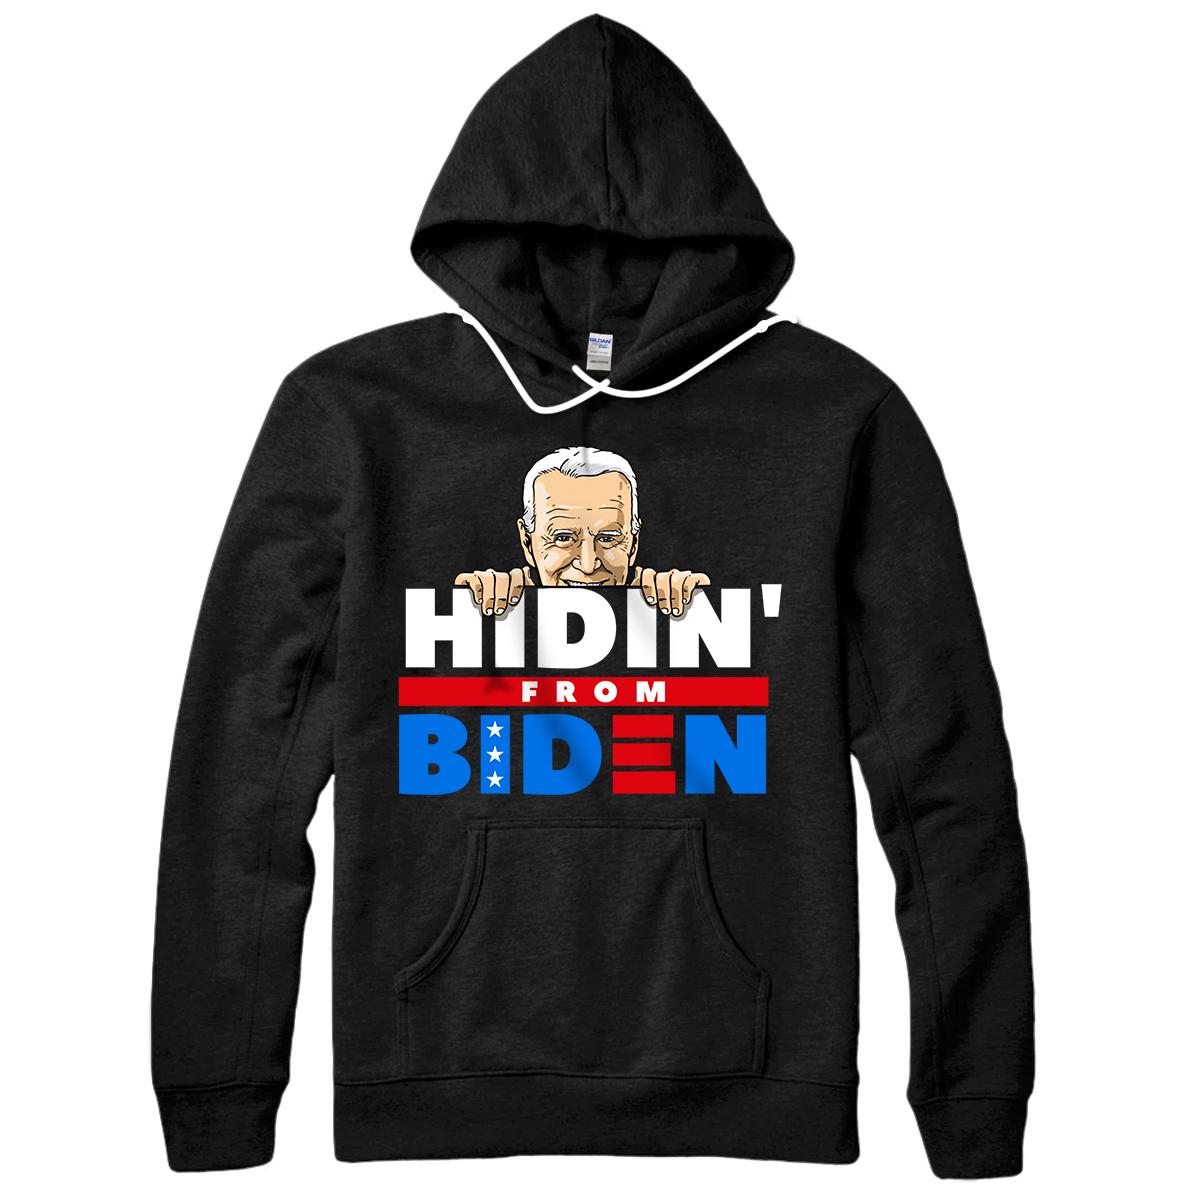 Personalized Hiding from Biden for President 2020 Funny Political Gift Pullover Hoodie